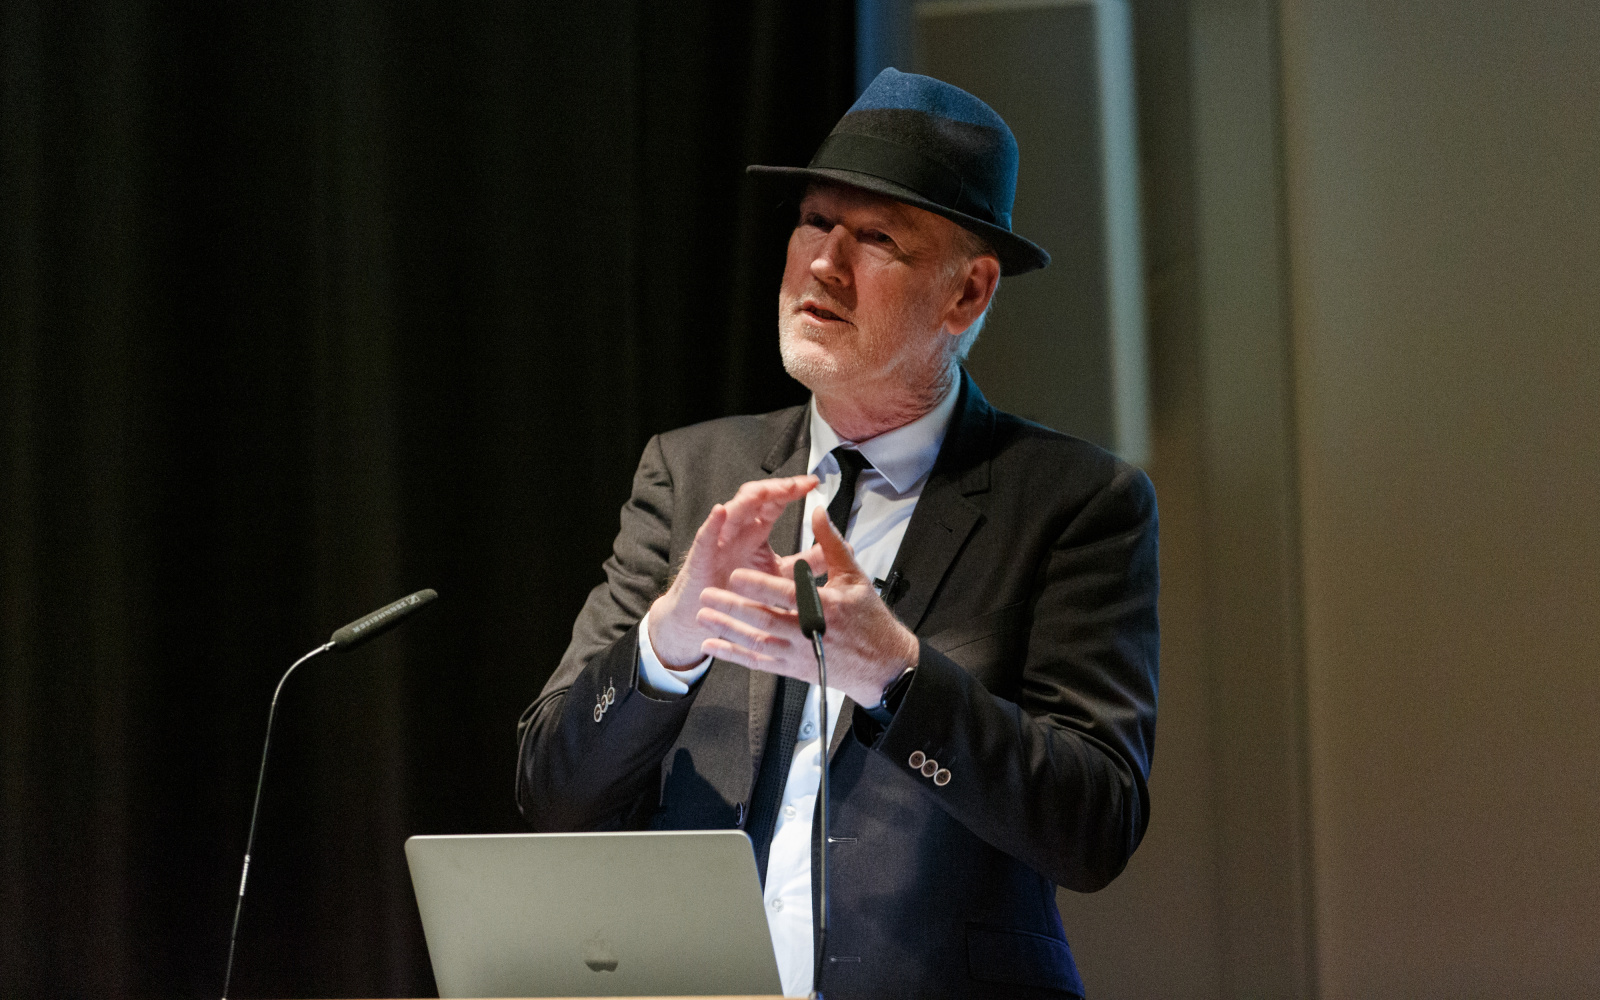 Thomas Paul, media artist and professor in suit and hat, can be seen standing behind a lectern with laptop and gesticulating.